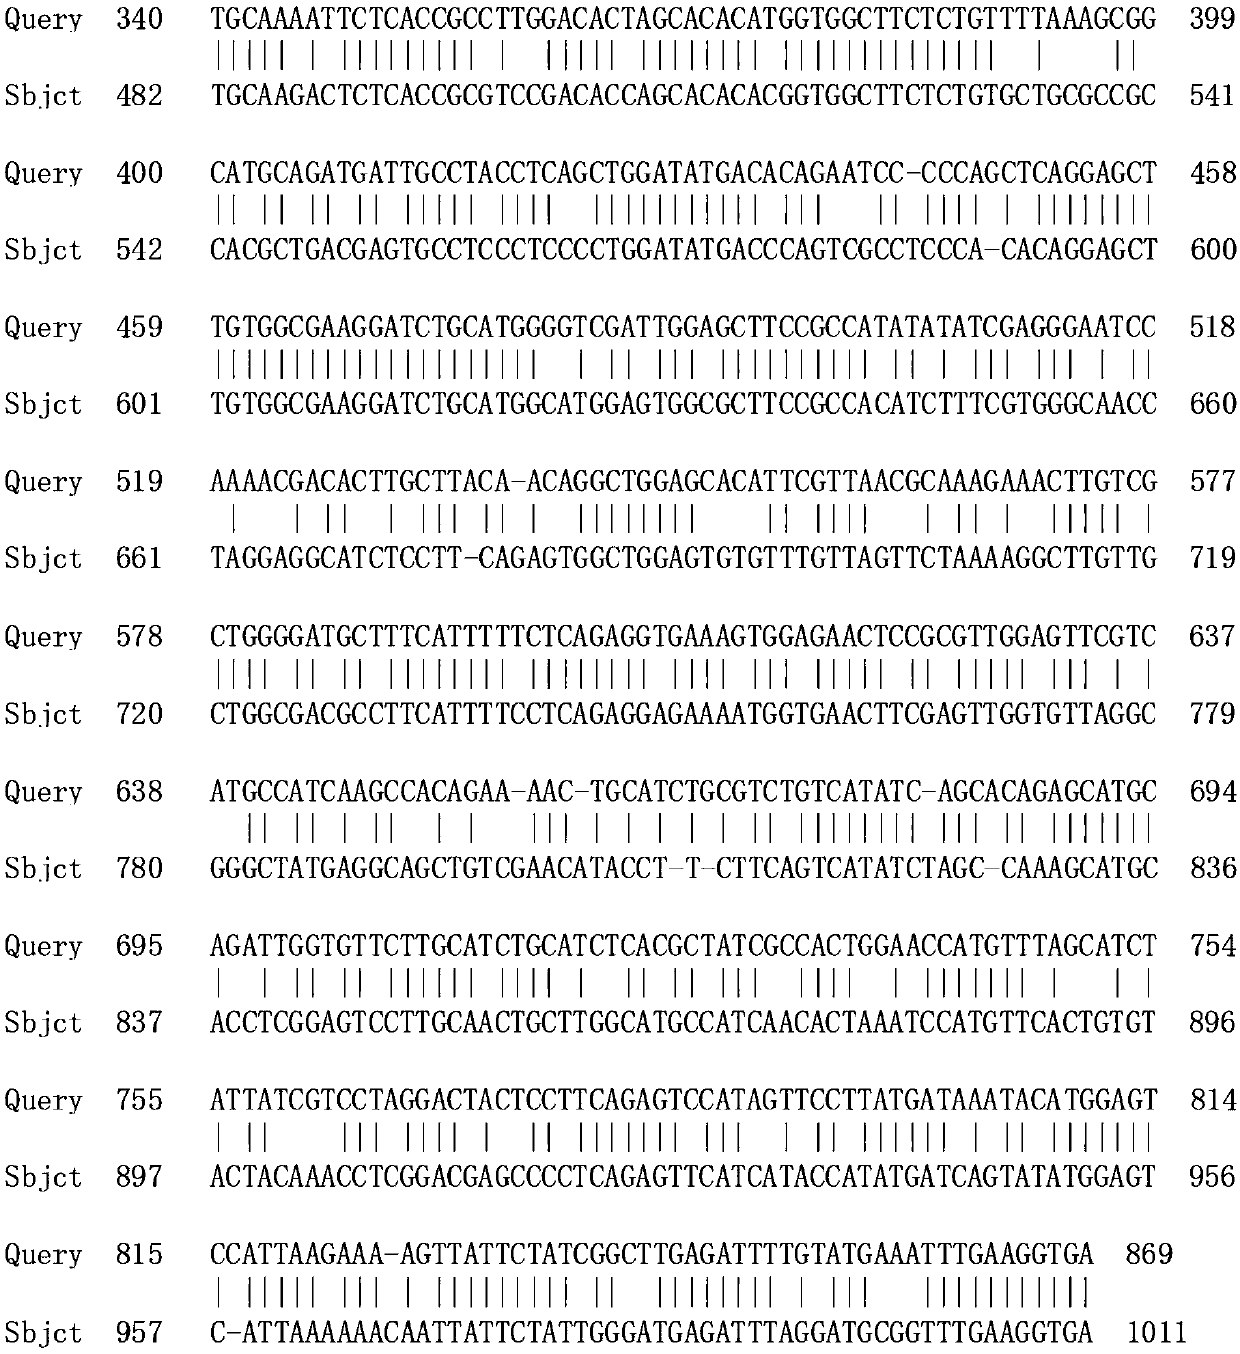 The auxin response factor aparf1 of Agapanthus chinensis and its coding gene and probe